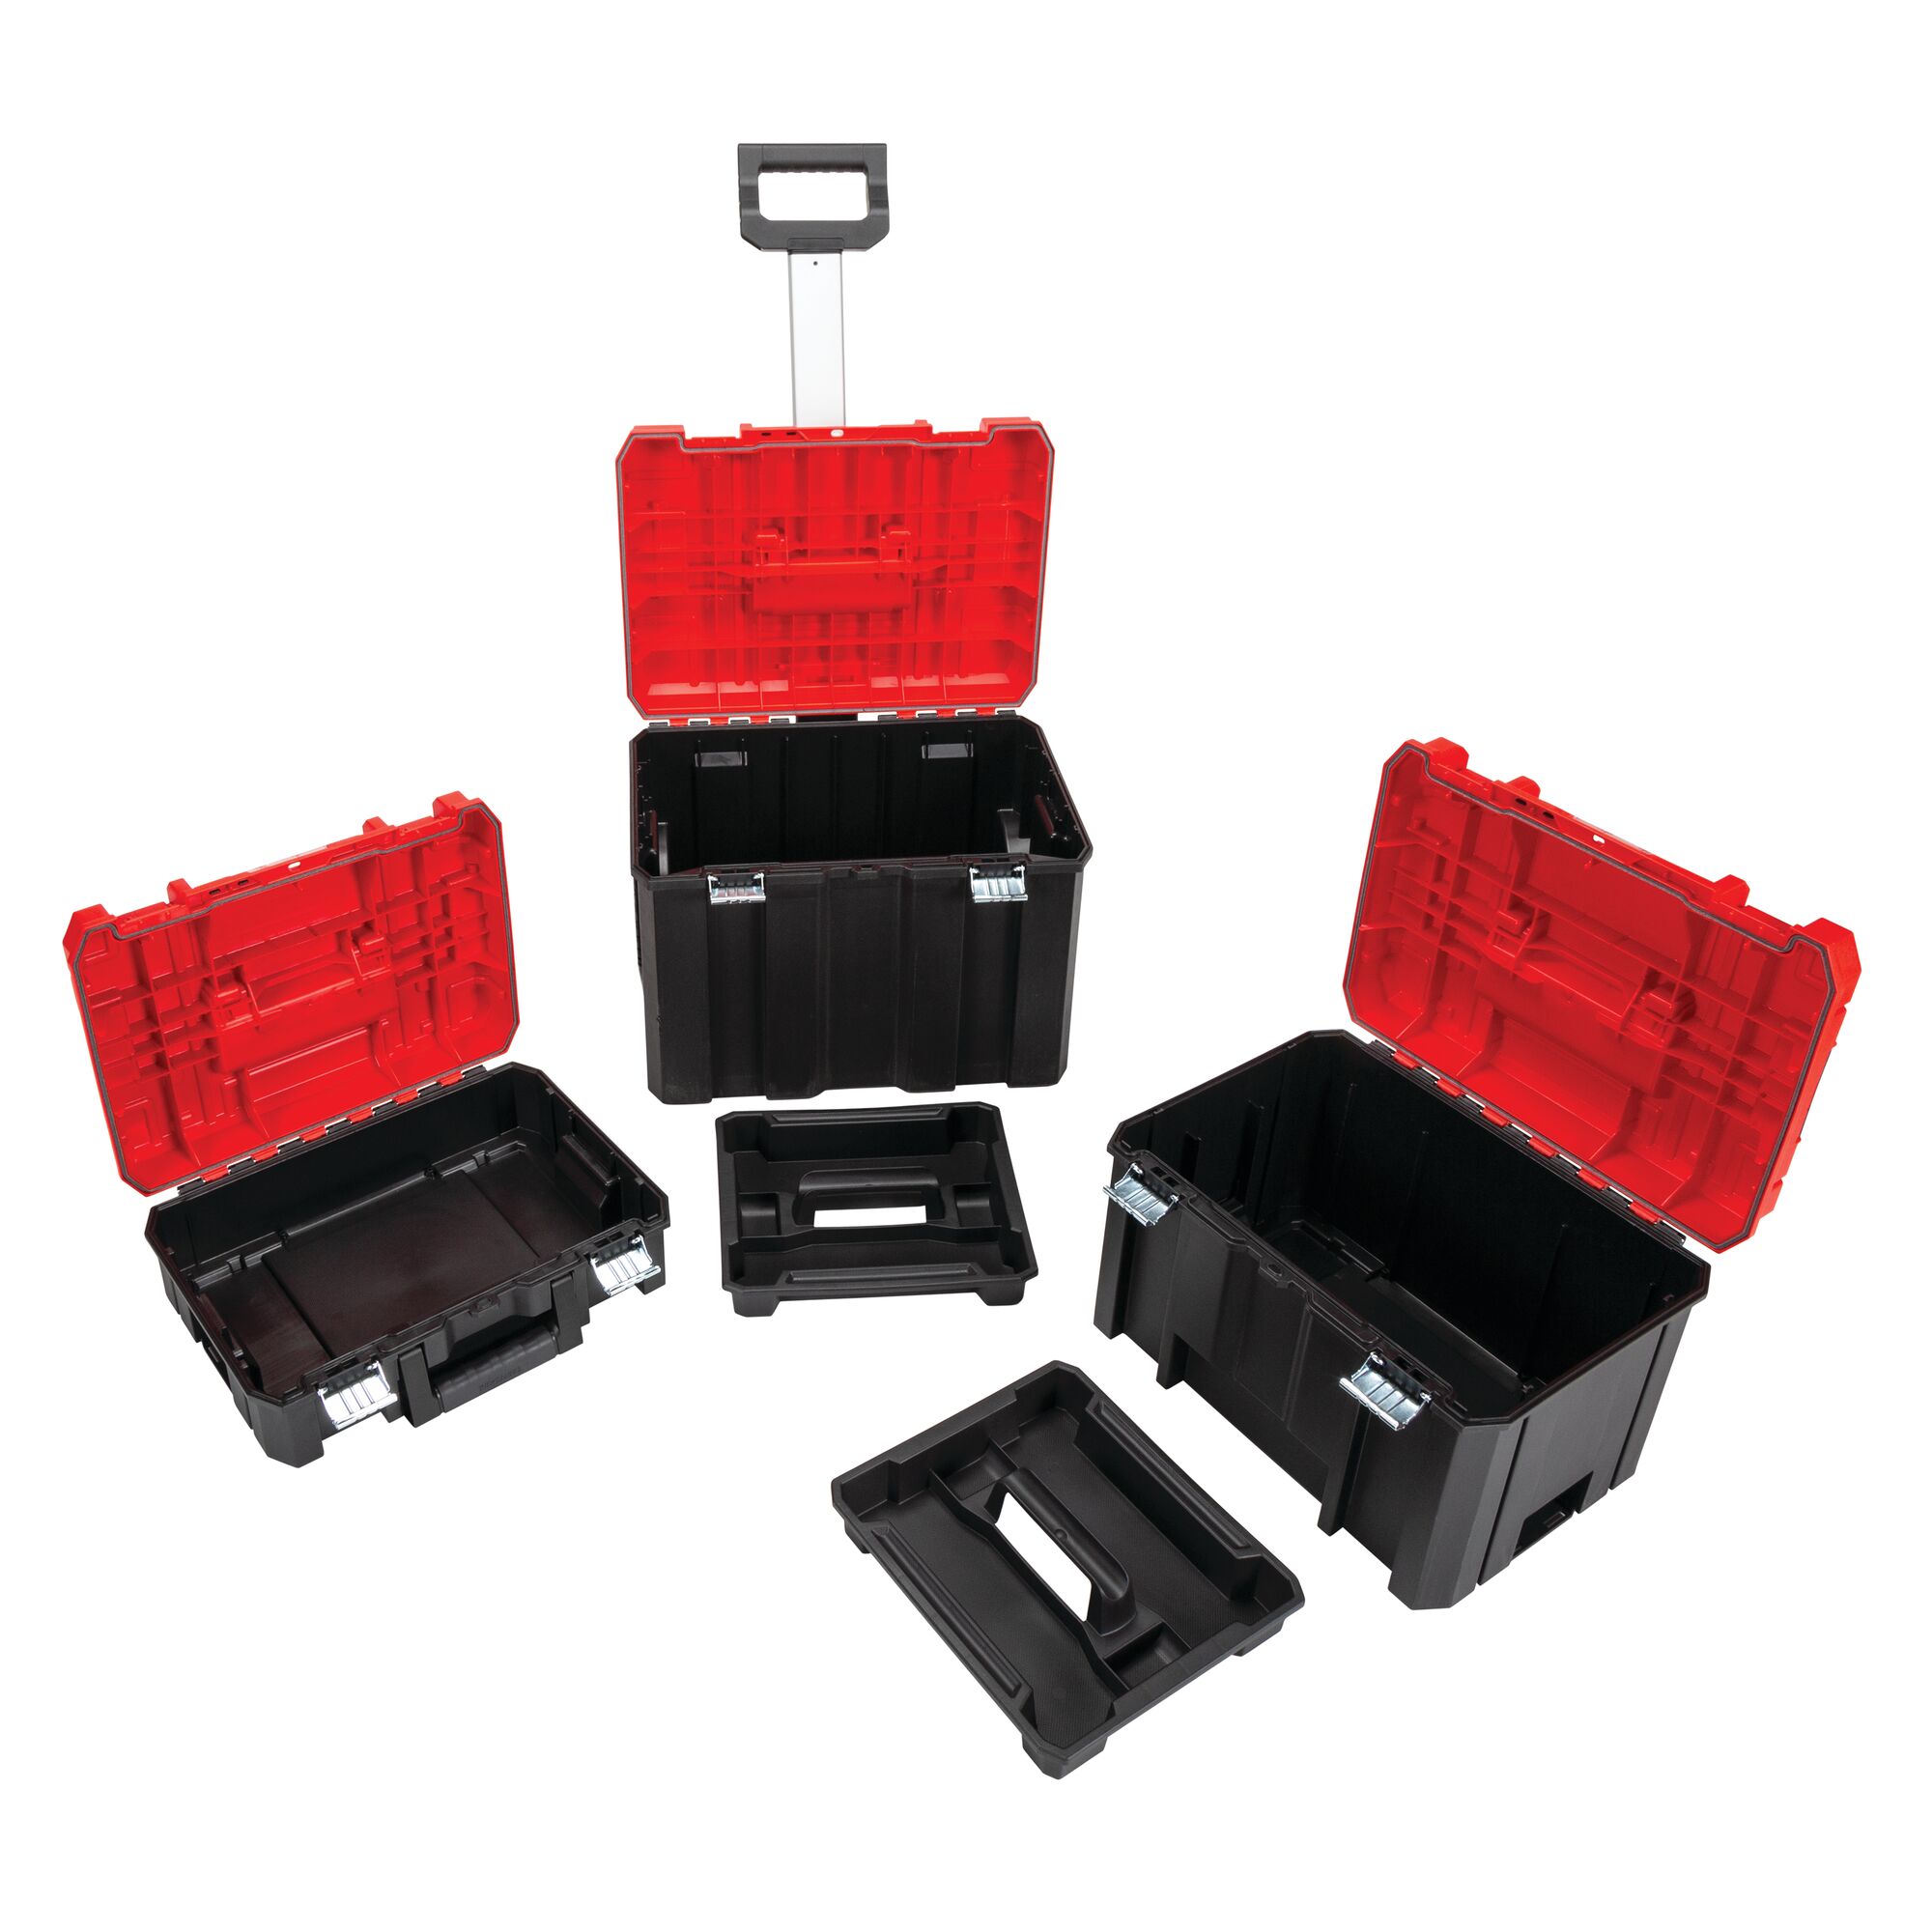 Bi material top handle feature of Versastack system 20 inch red plastic wheeled lockable tool box.